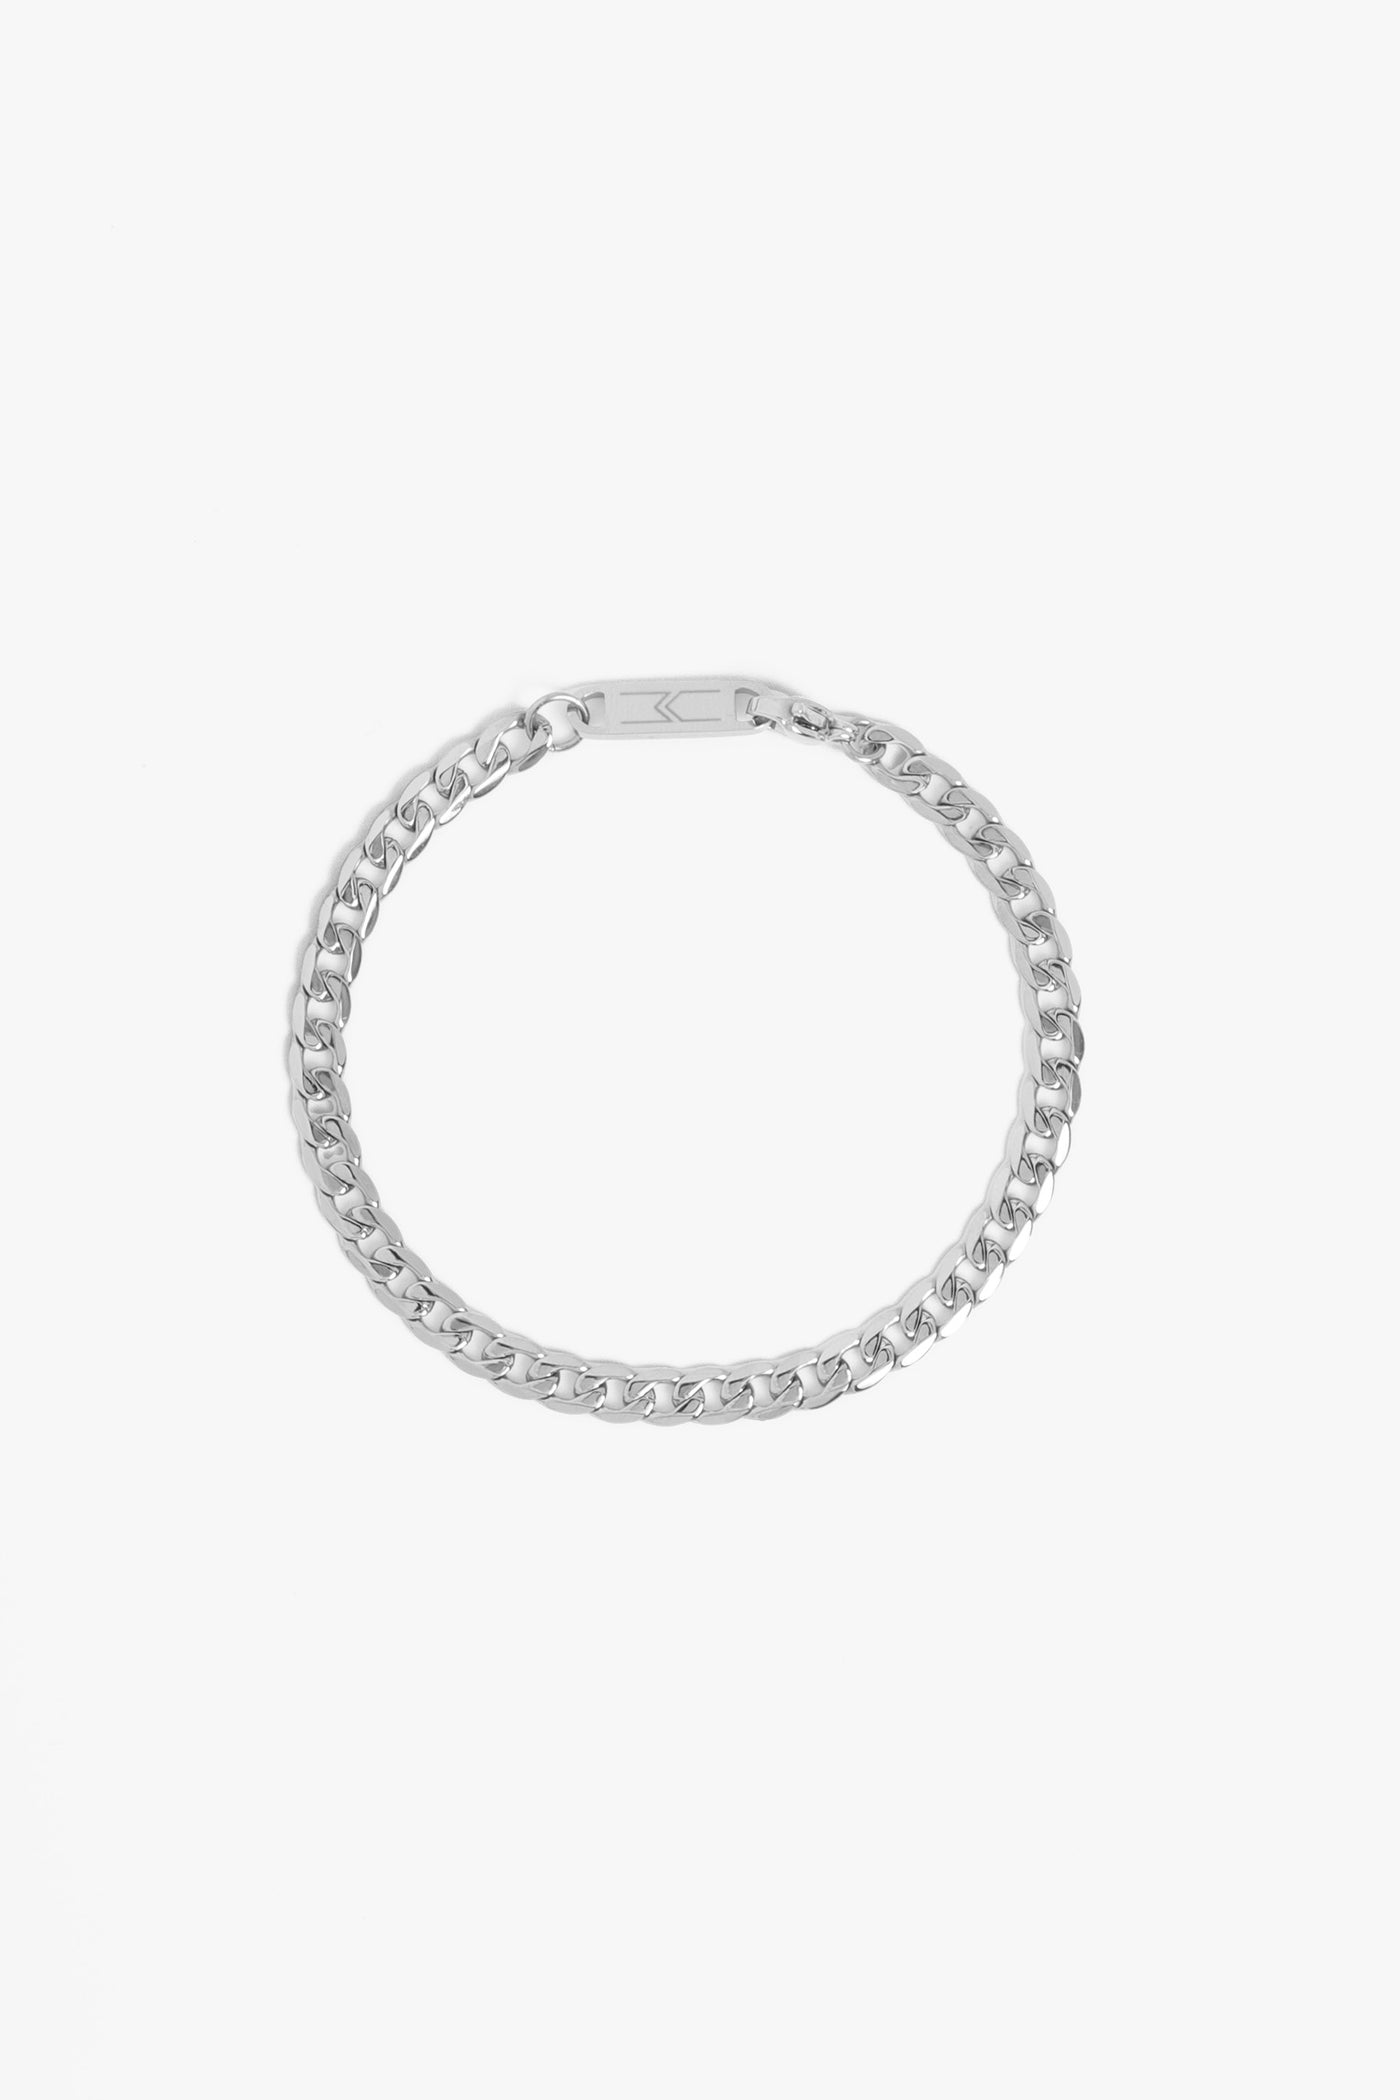 Marrin Costello Jewelry Callie Bracelet small cuban link chain bracelet with lobster clasp closure. Waterproof, sustainable, hypoallergenic. Polished stainless steel.